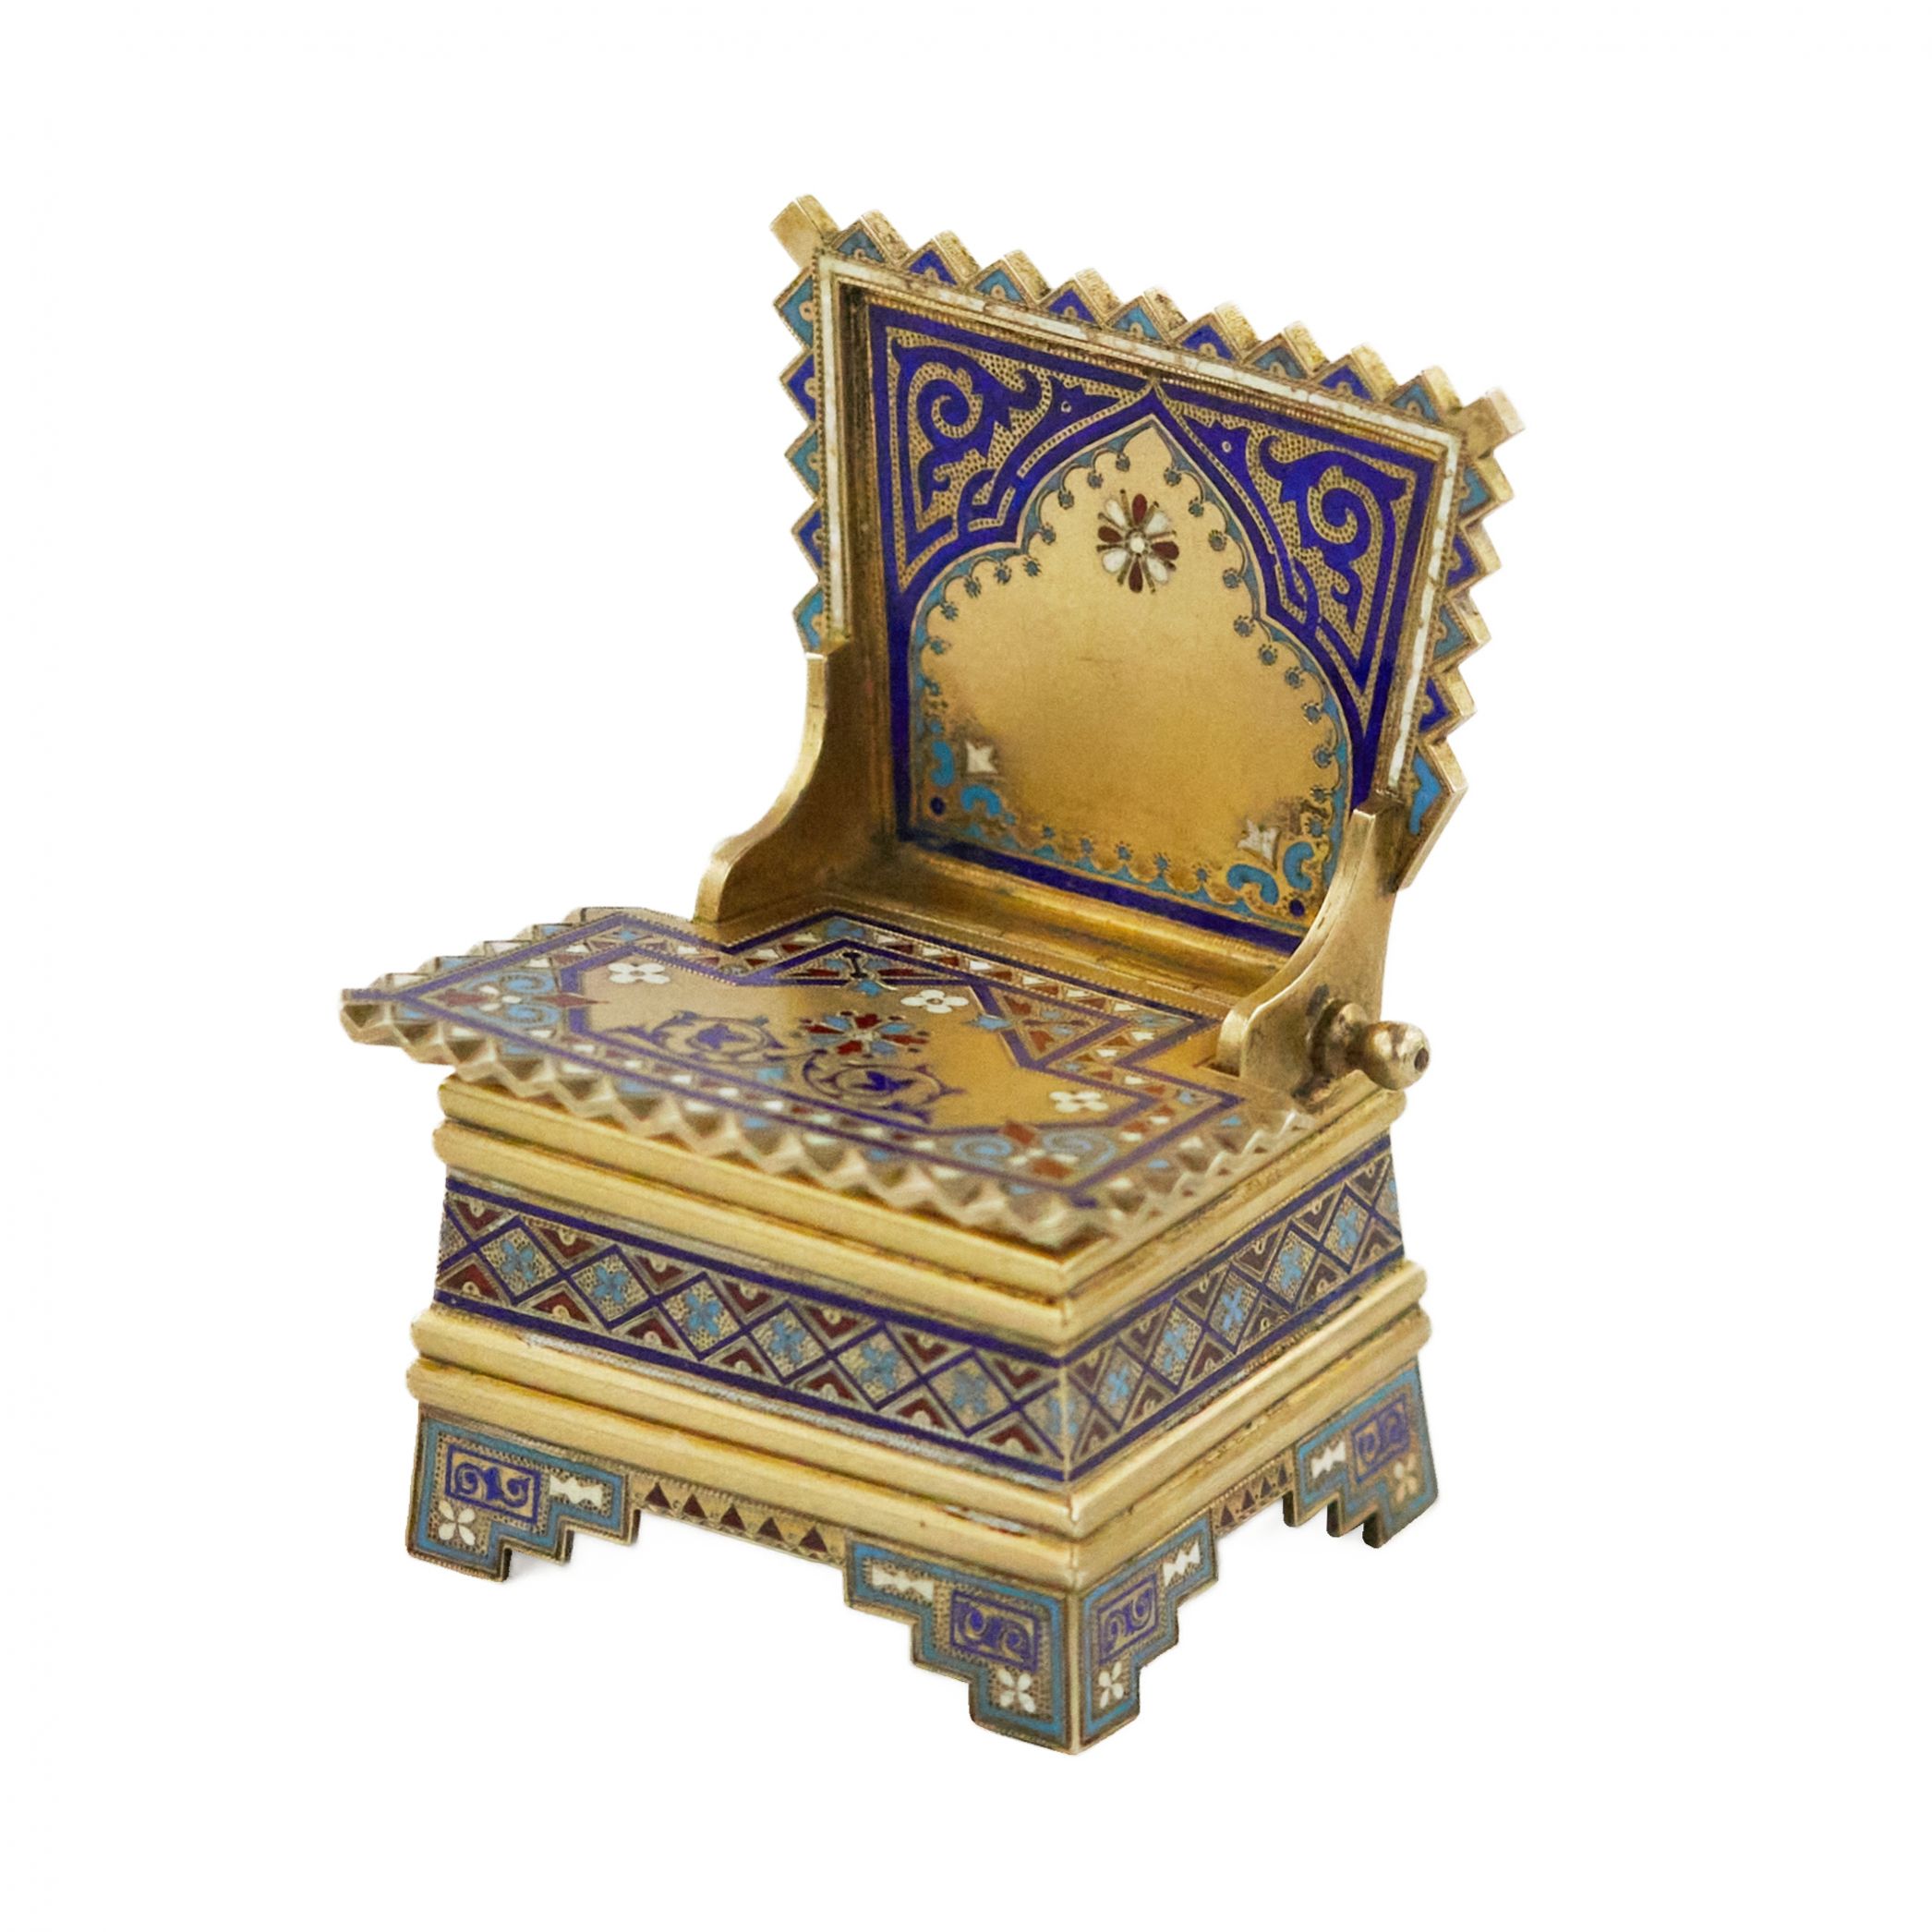 KHLEBNIKOV-Silver-salt-shaker-throne-champlevé-enamel-and-gilding-in-neo-Russian-style-Late-19th-century-